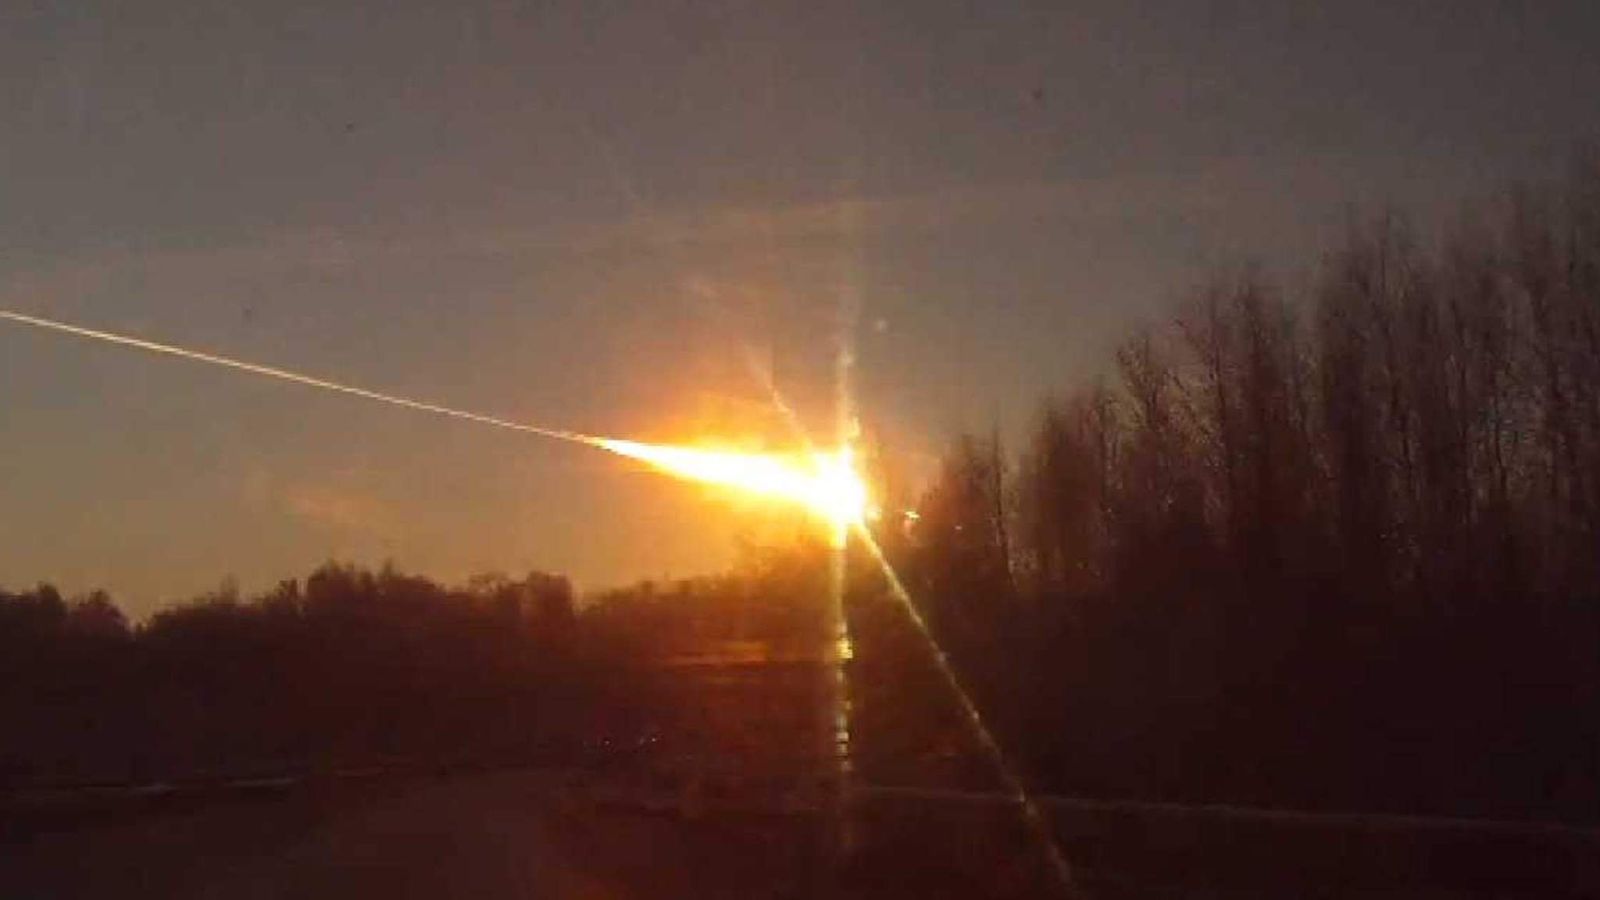 Chelyabinsk meteor: Ten years on from 'wake-up call', how safe are we from a potentially catastrophic strike?